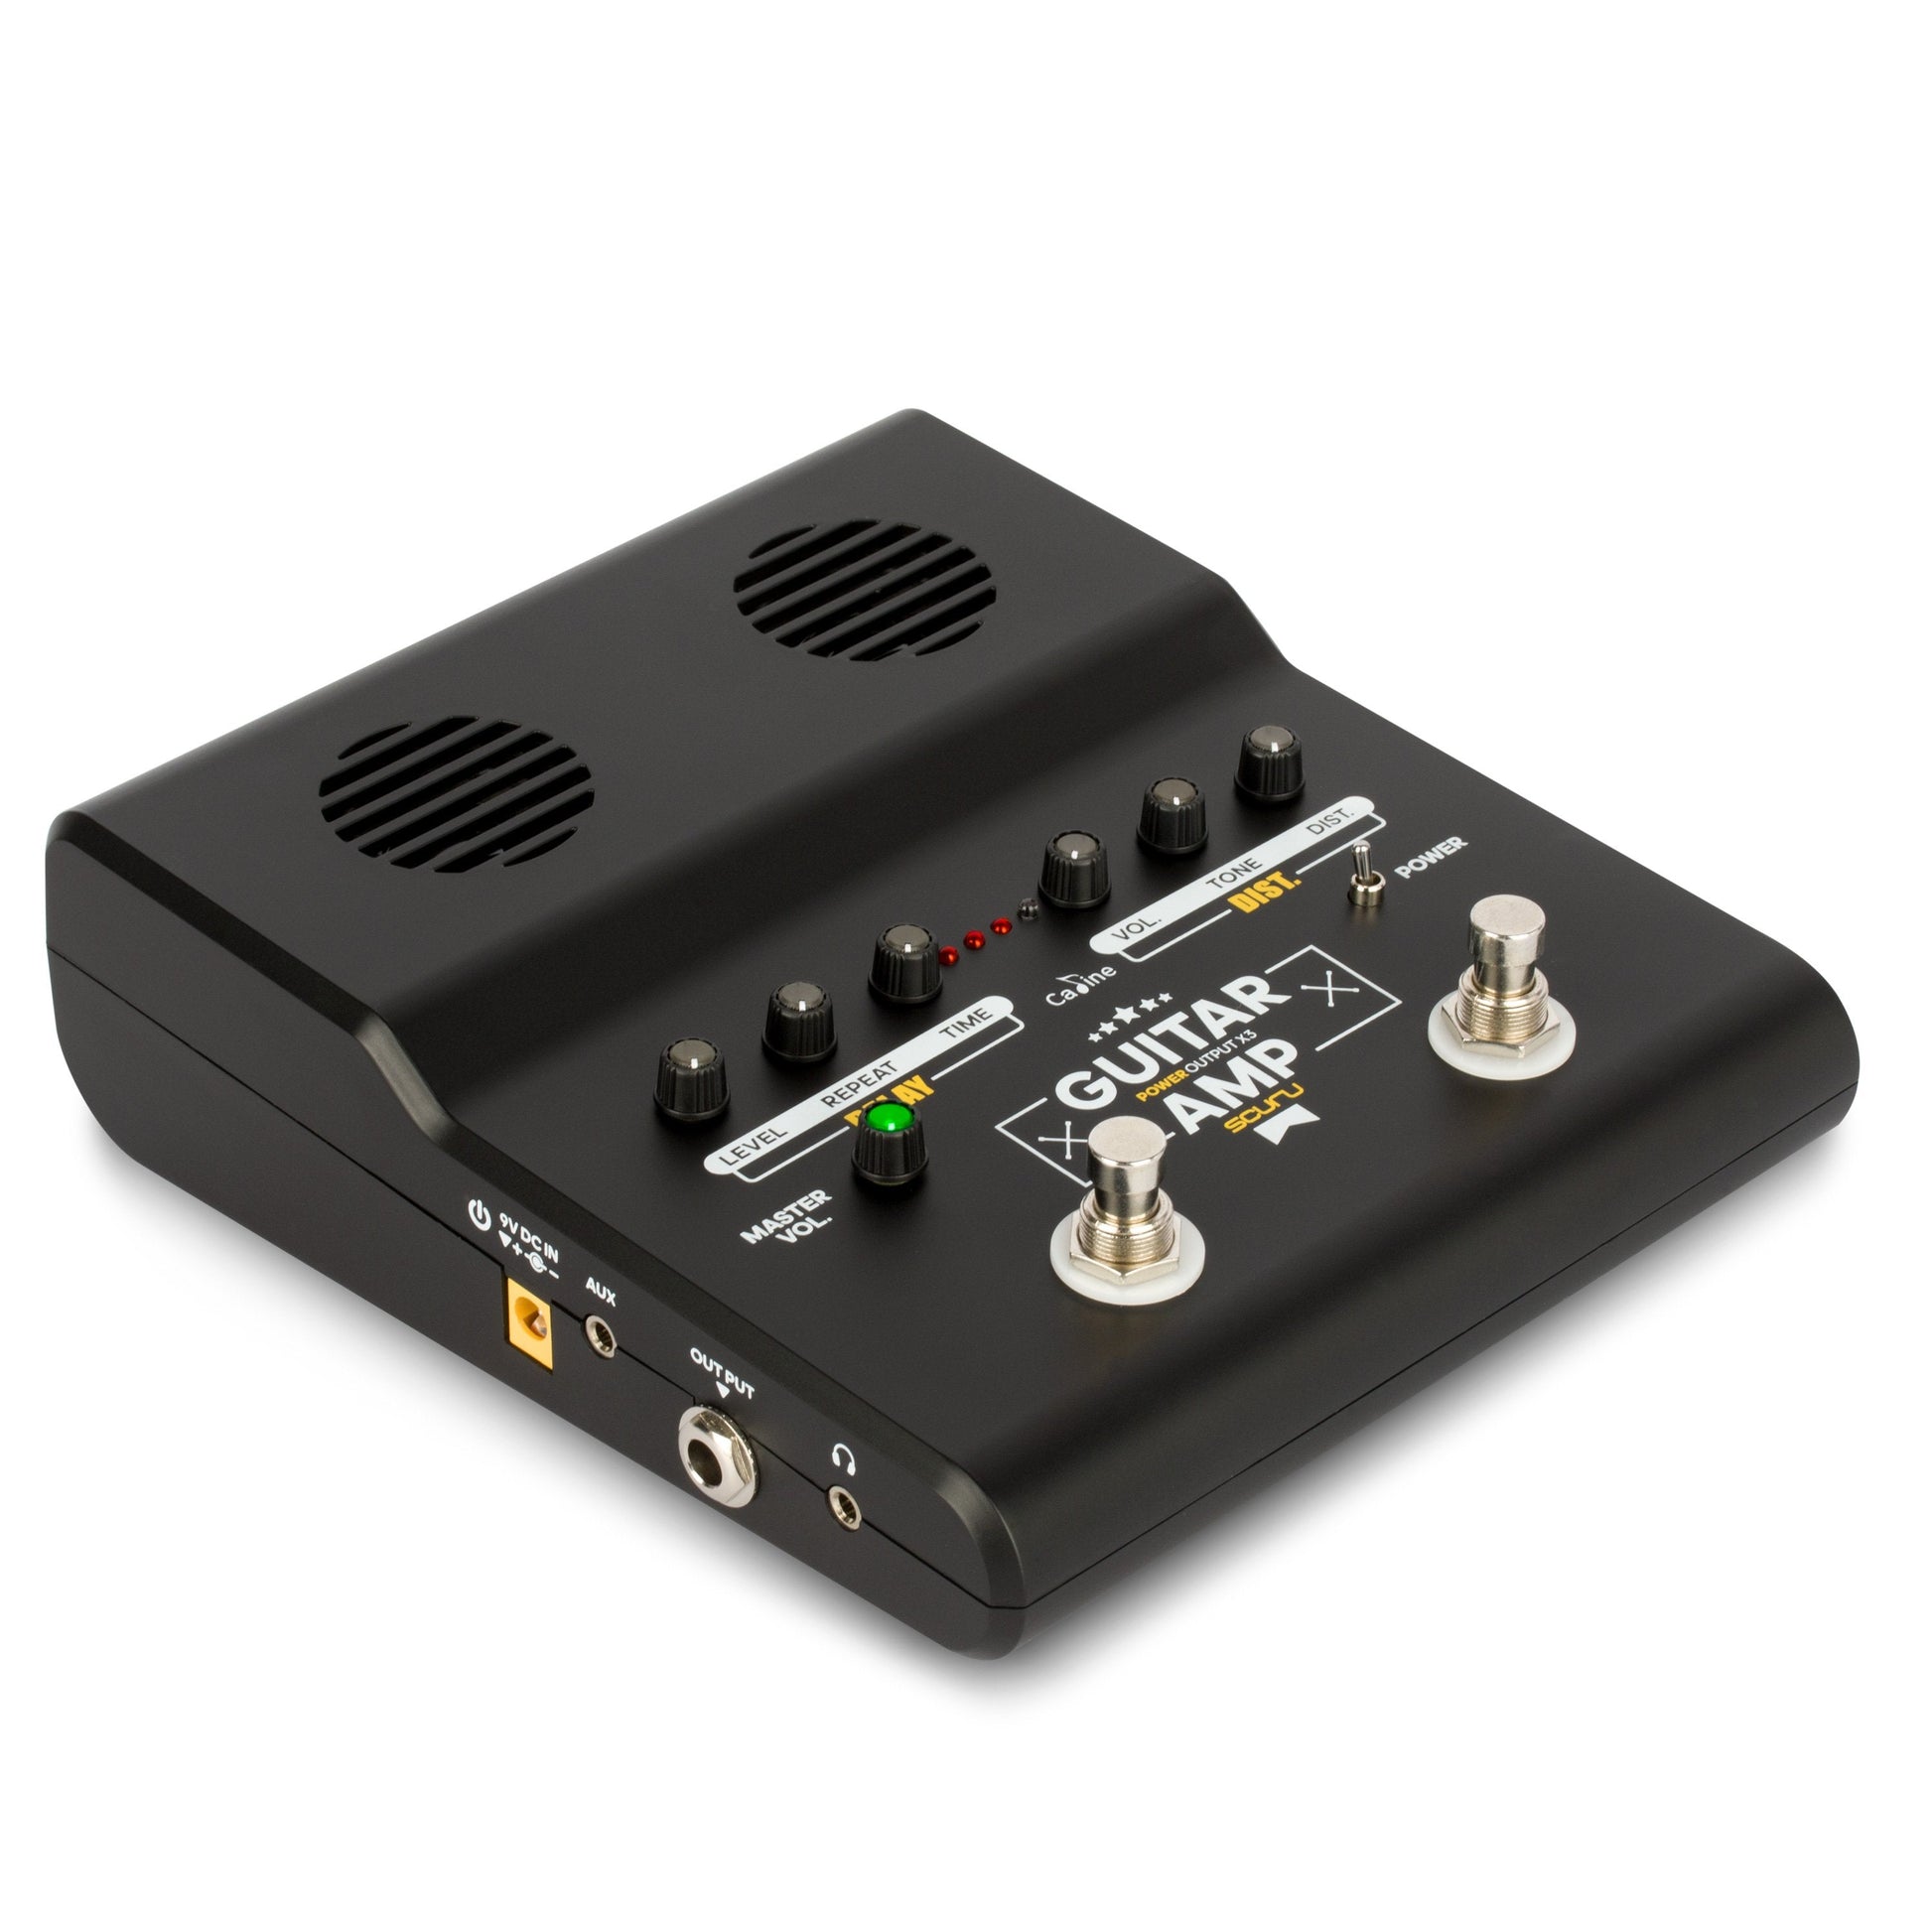 Scuru S5 Mini Guitar Amp with Power Supply and Effects - GuitarPusher